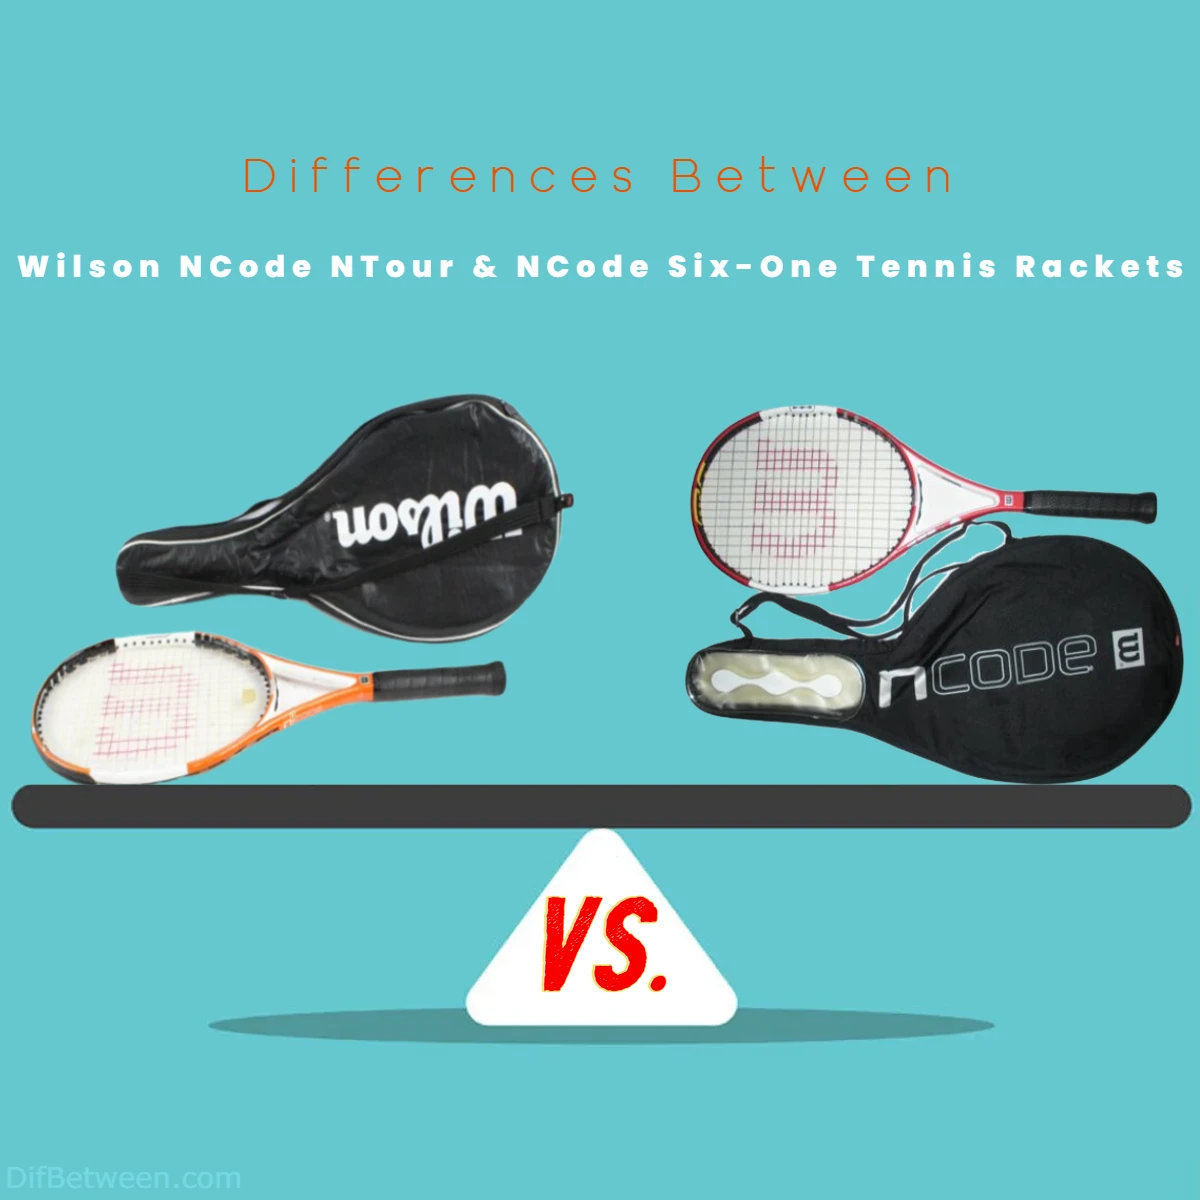 Differences Between Wilson NCode NTour vs NCode Six One Tennis Rackets